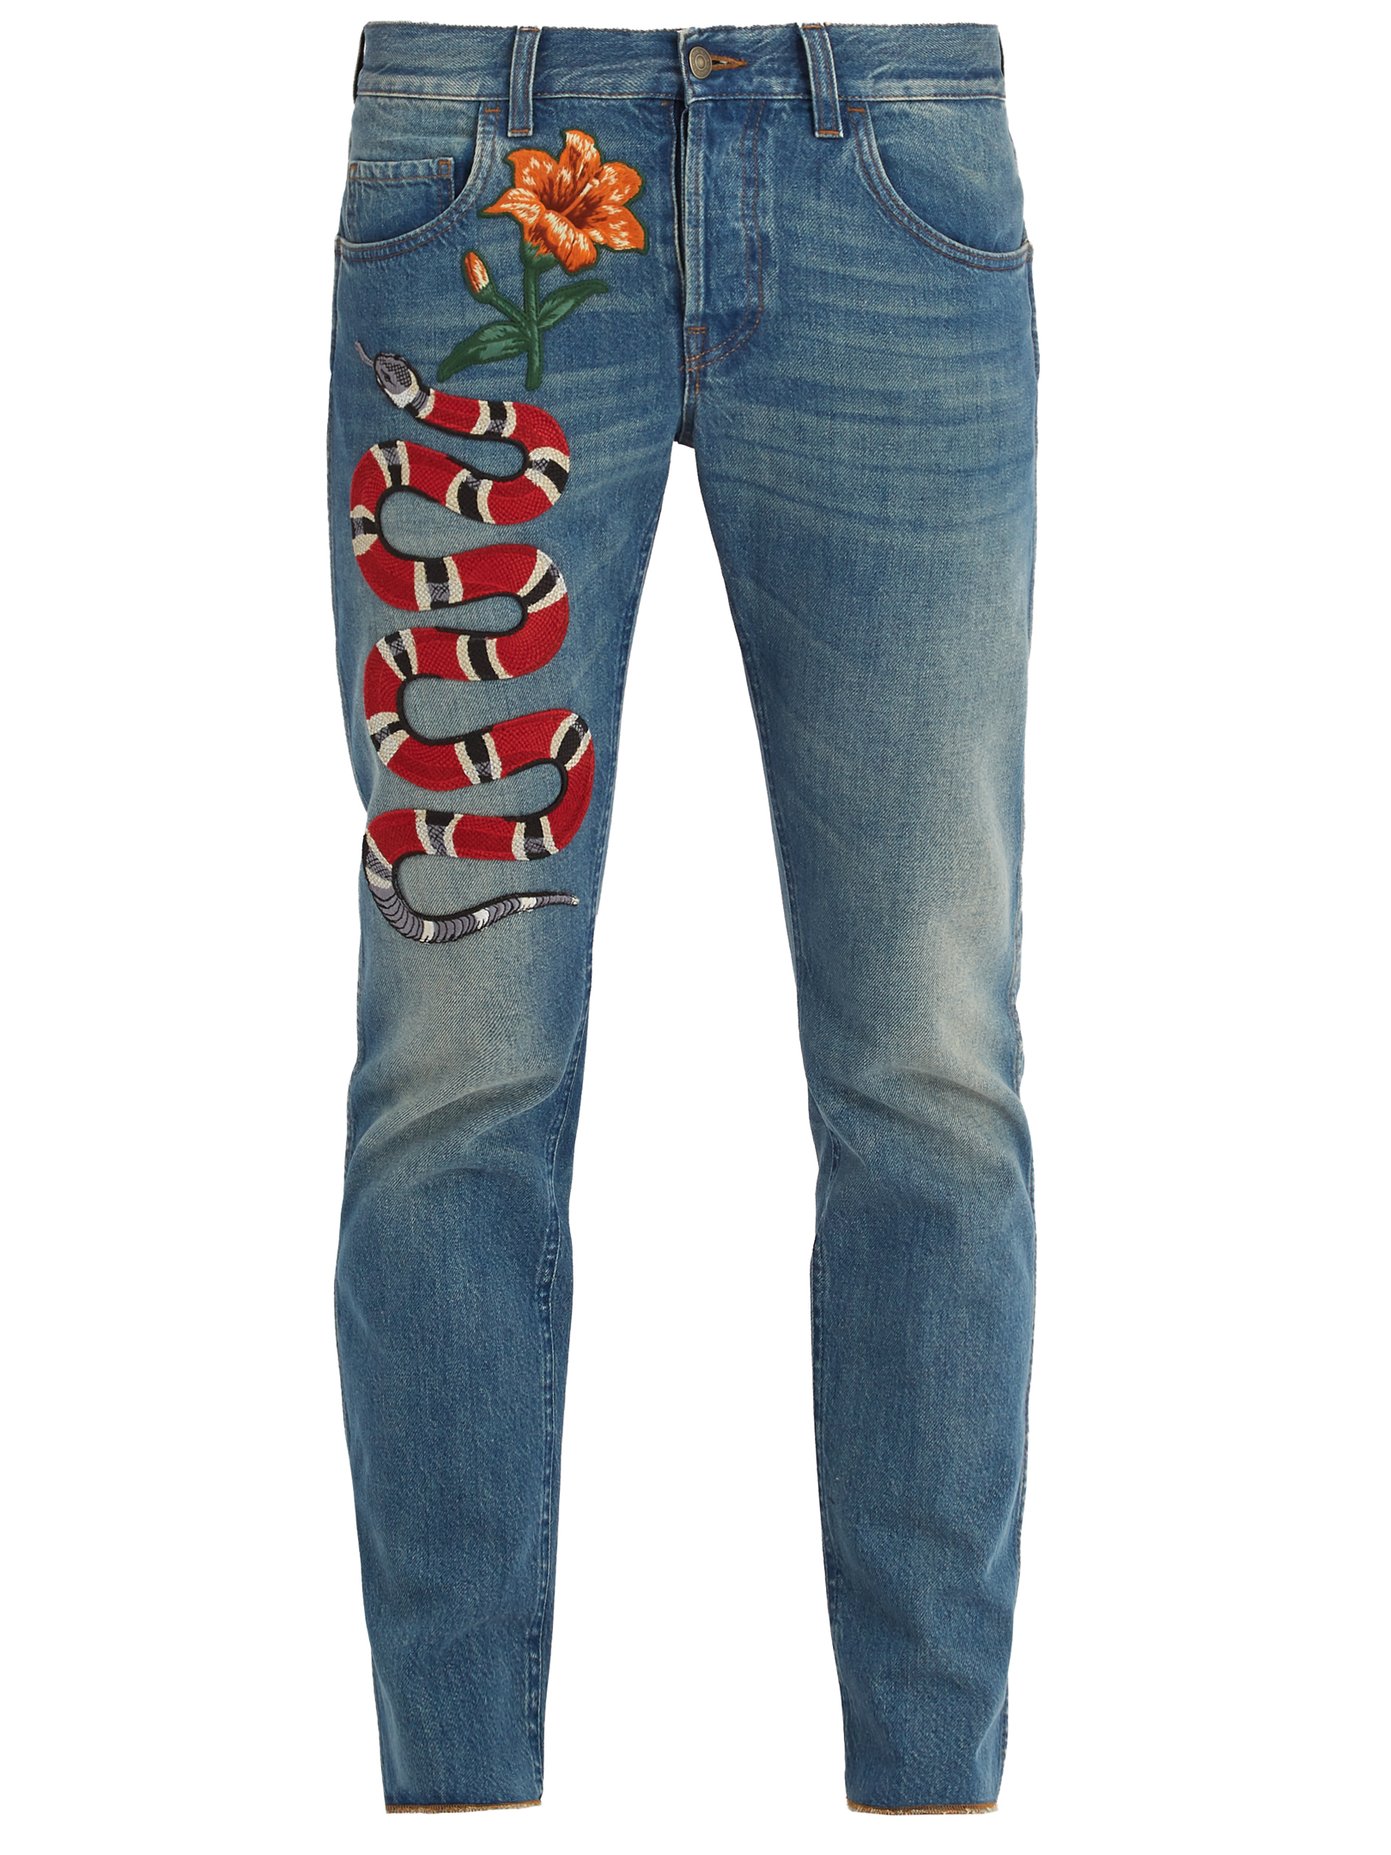 gucci snake jeans mens